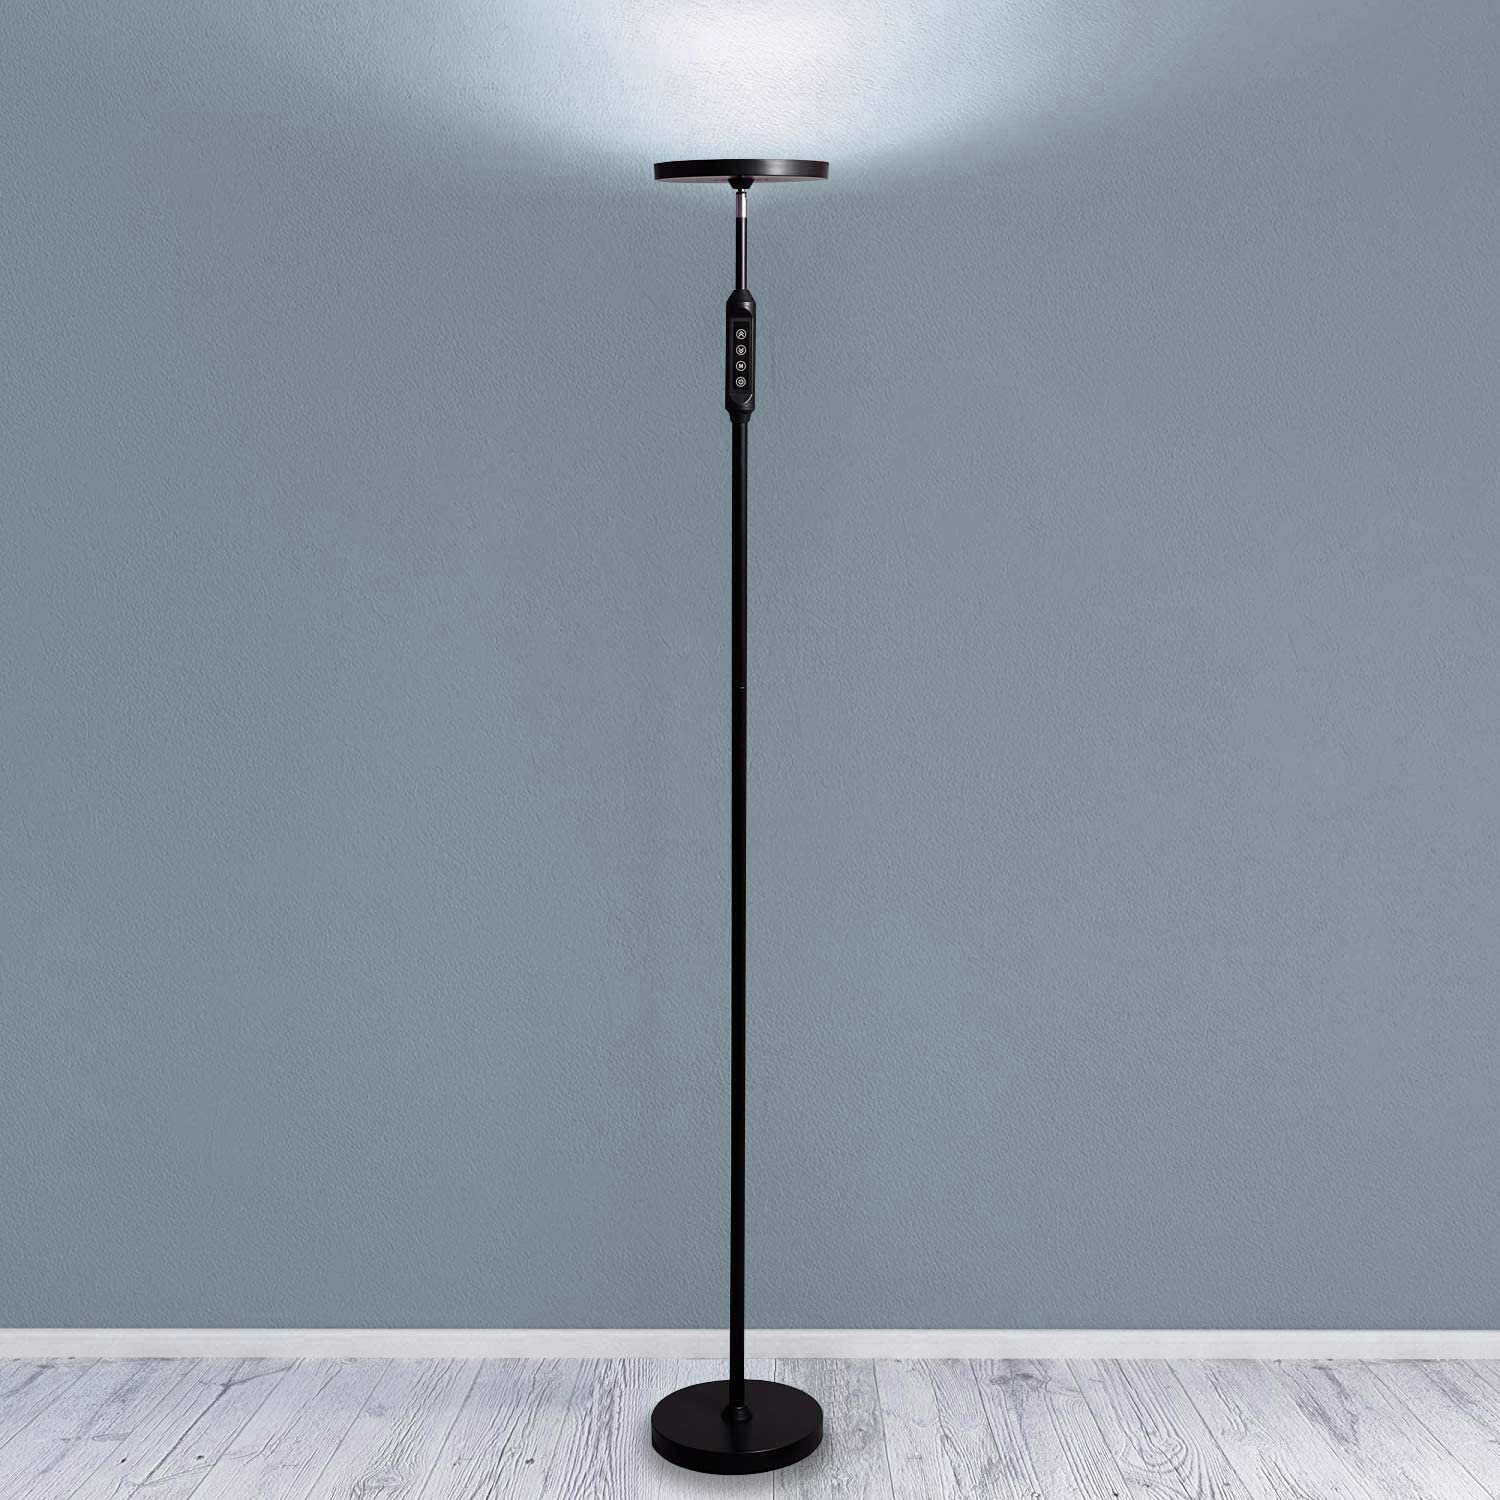 Linkind 24W Dimmable LED Torchiere Floor Lamp with Remote and Touch Control 5 Color Temperatures & Brightness Standing Tall Lamp Super Bright Pole Uplight for Living Room Bedroon Office